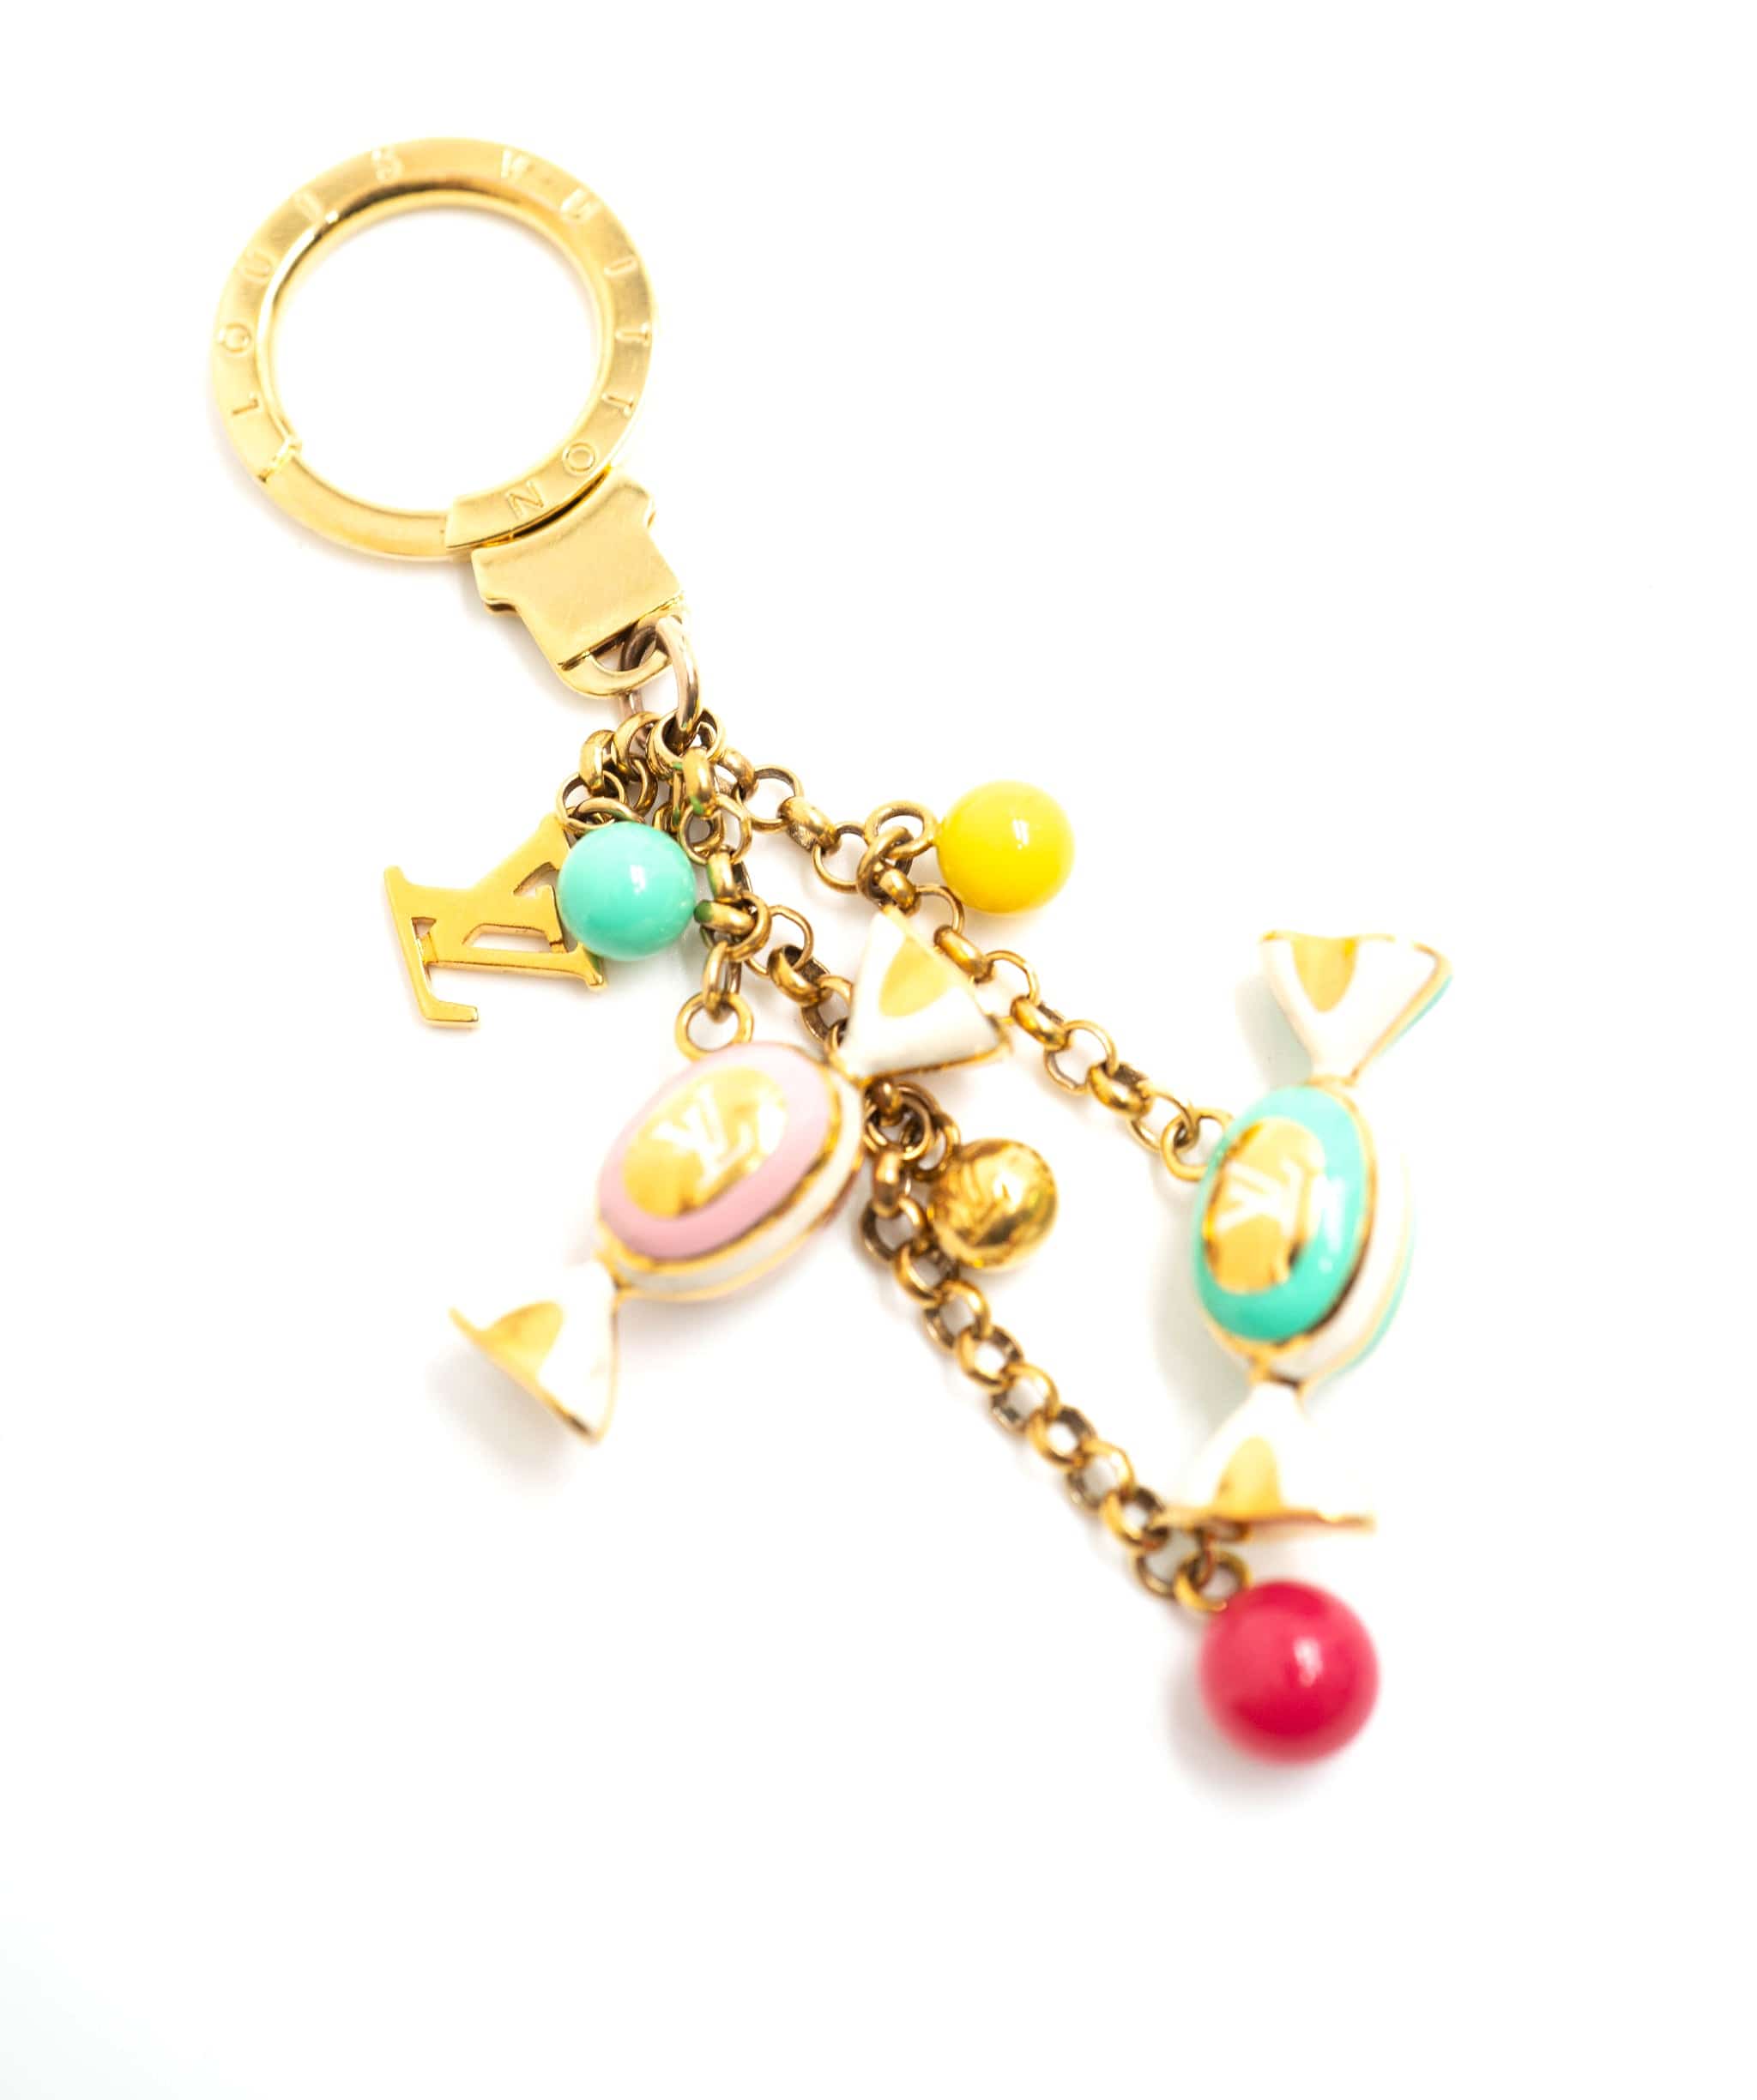 Louis Vuitton LOUIS VUITTON Porte Cles Delice Candy Key Holder and Bag Charm - AWL3495